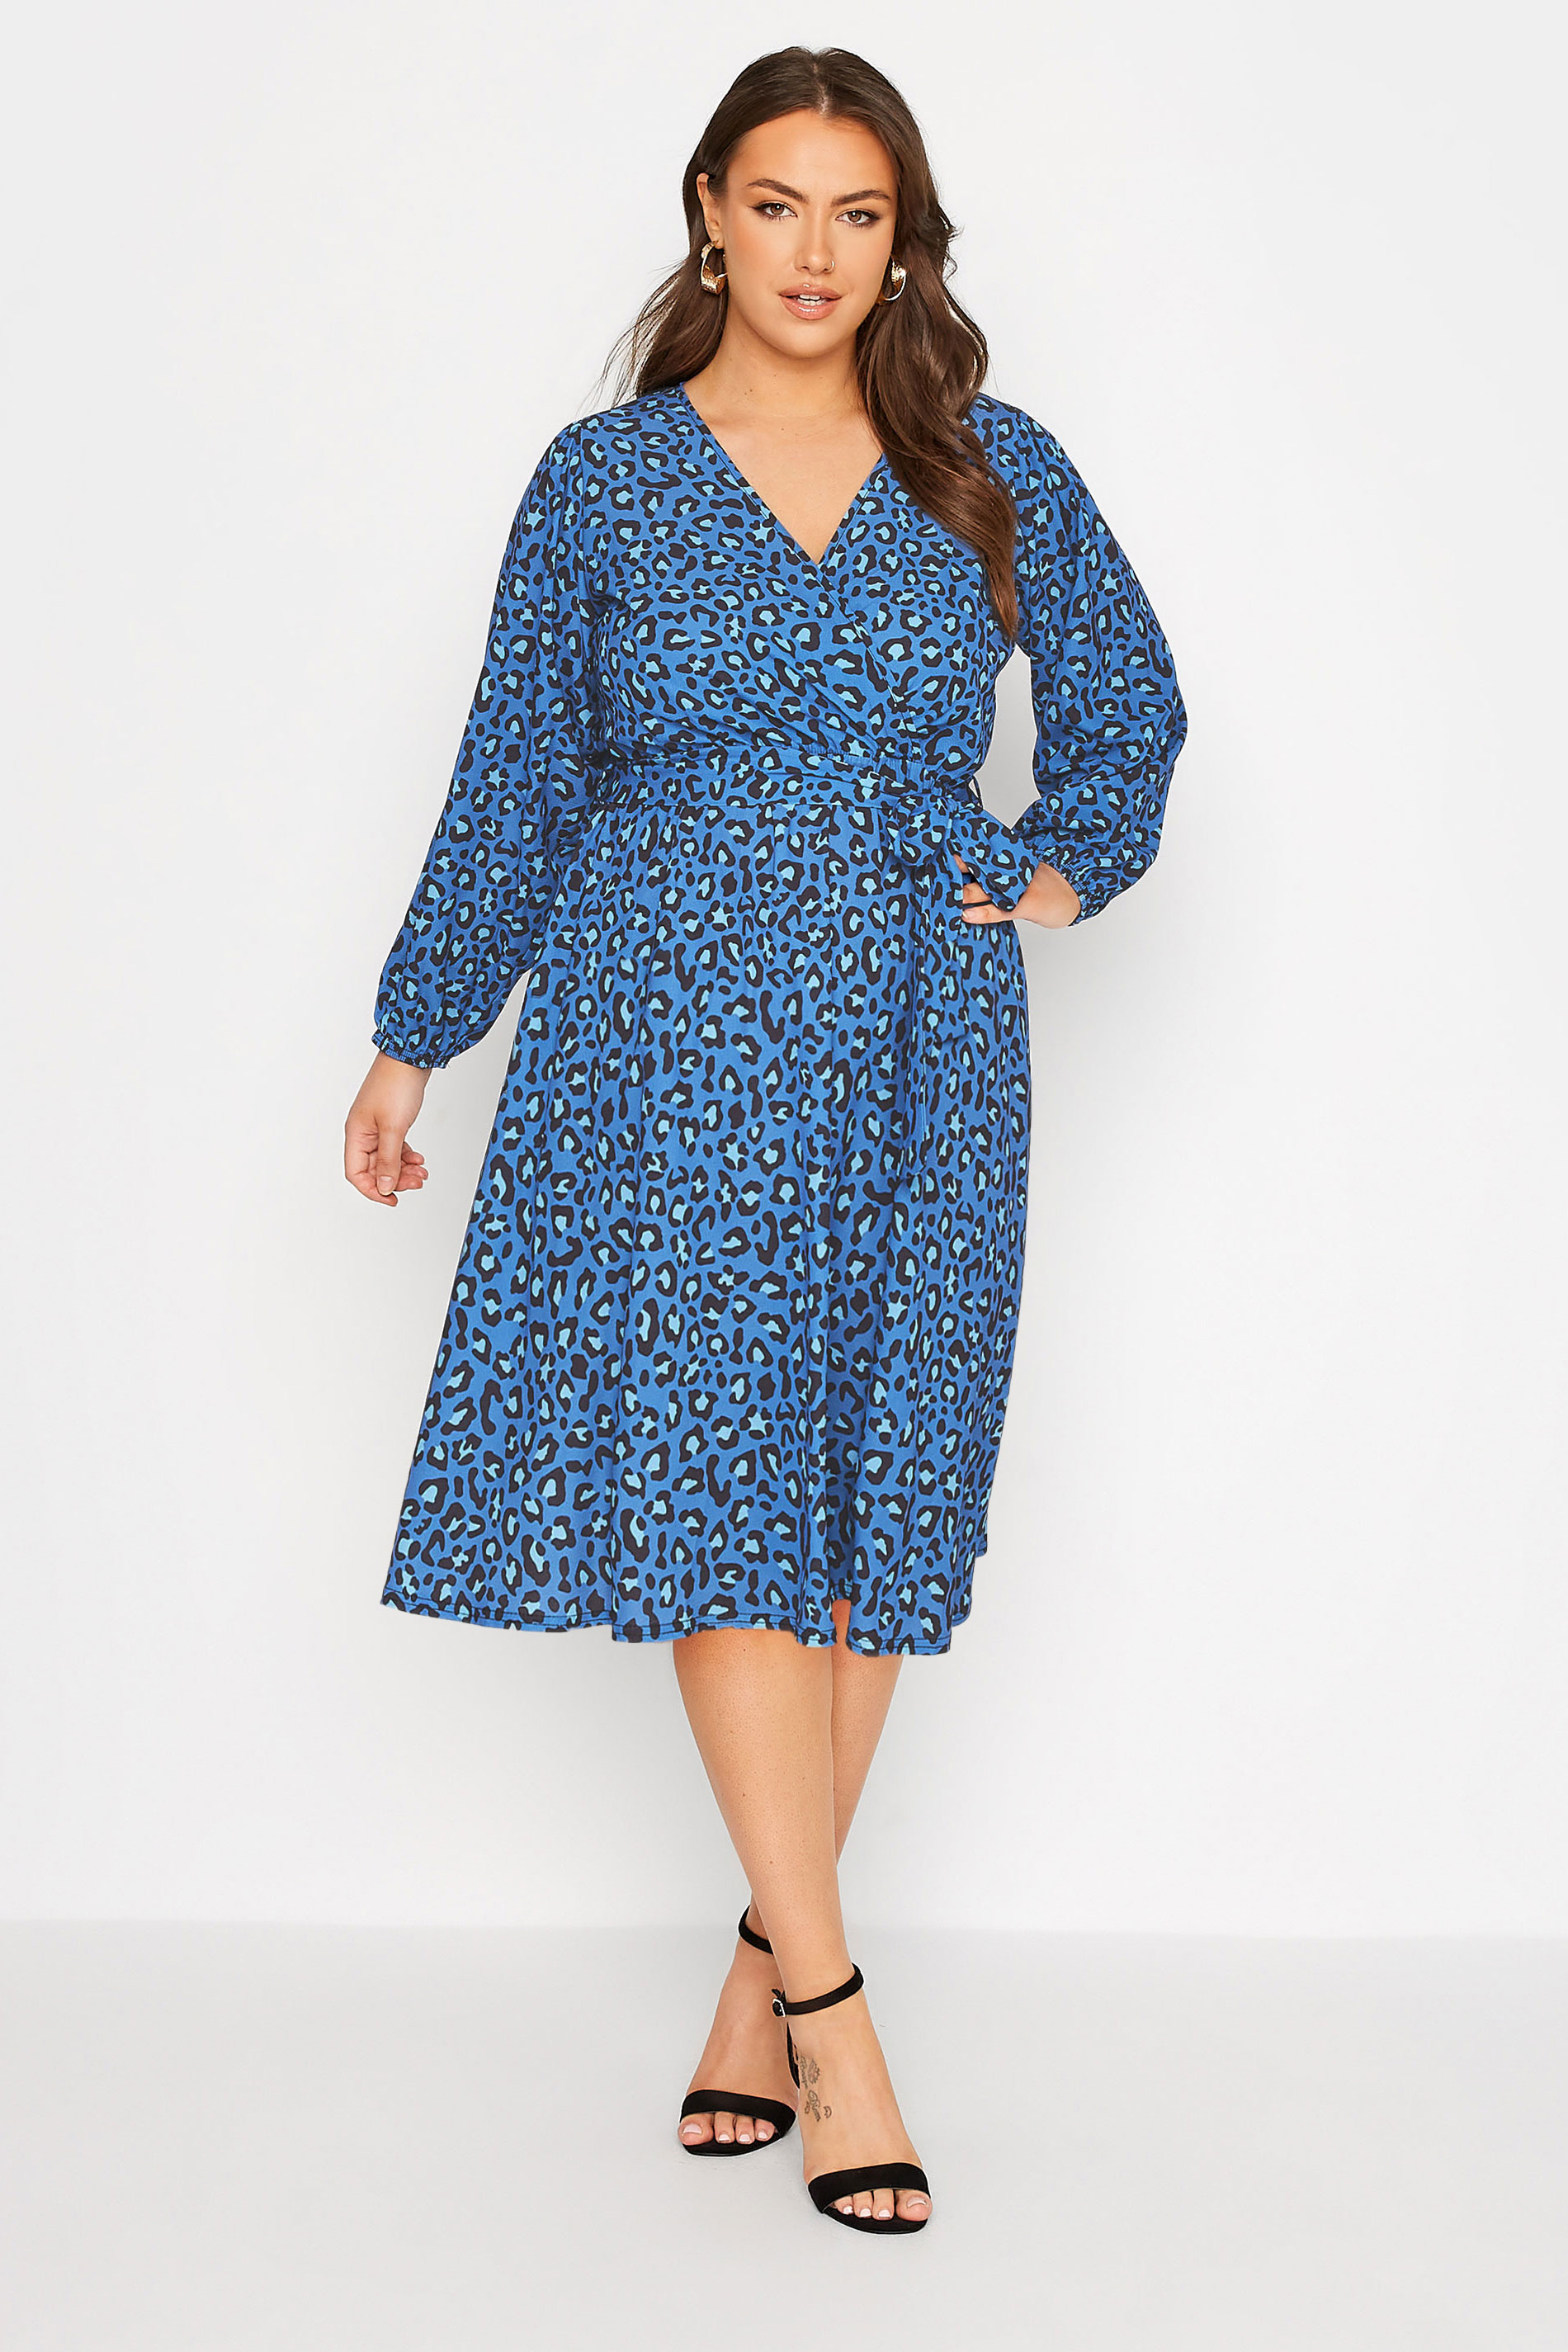 Robes Grande Taille Grande taille  Robes Portefeuilles | YOURS LONDON Curve Blue Leopard Print Wrap Dress - UO17563